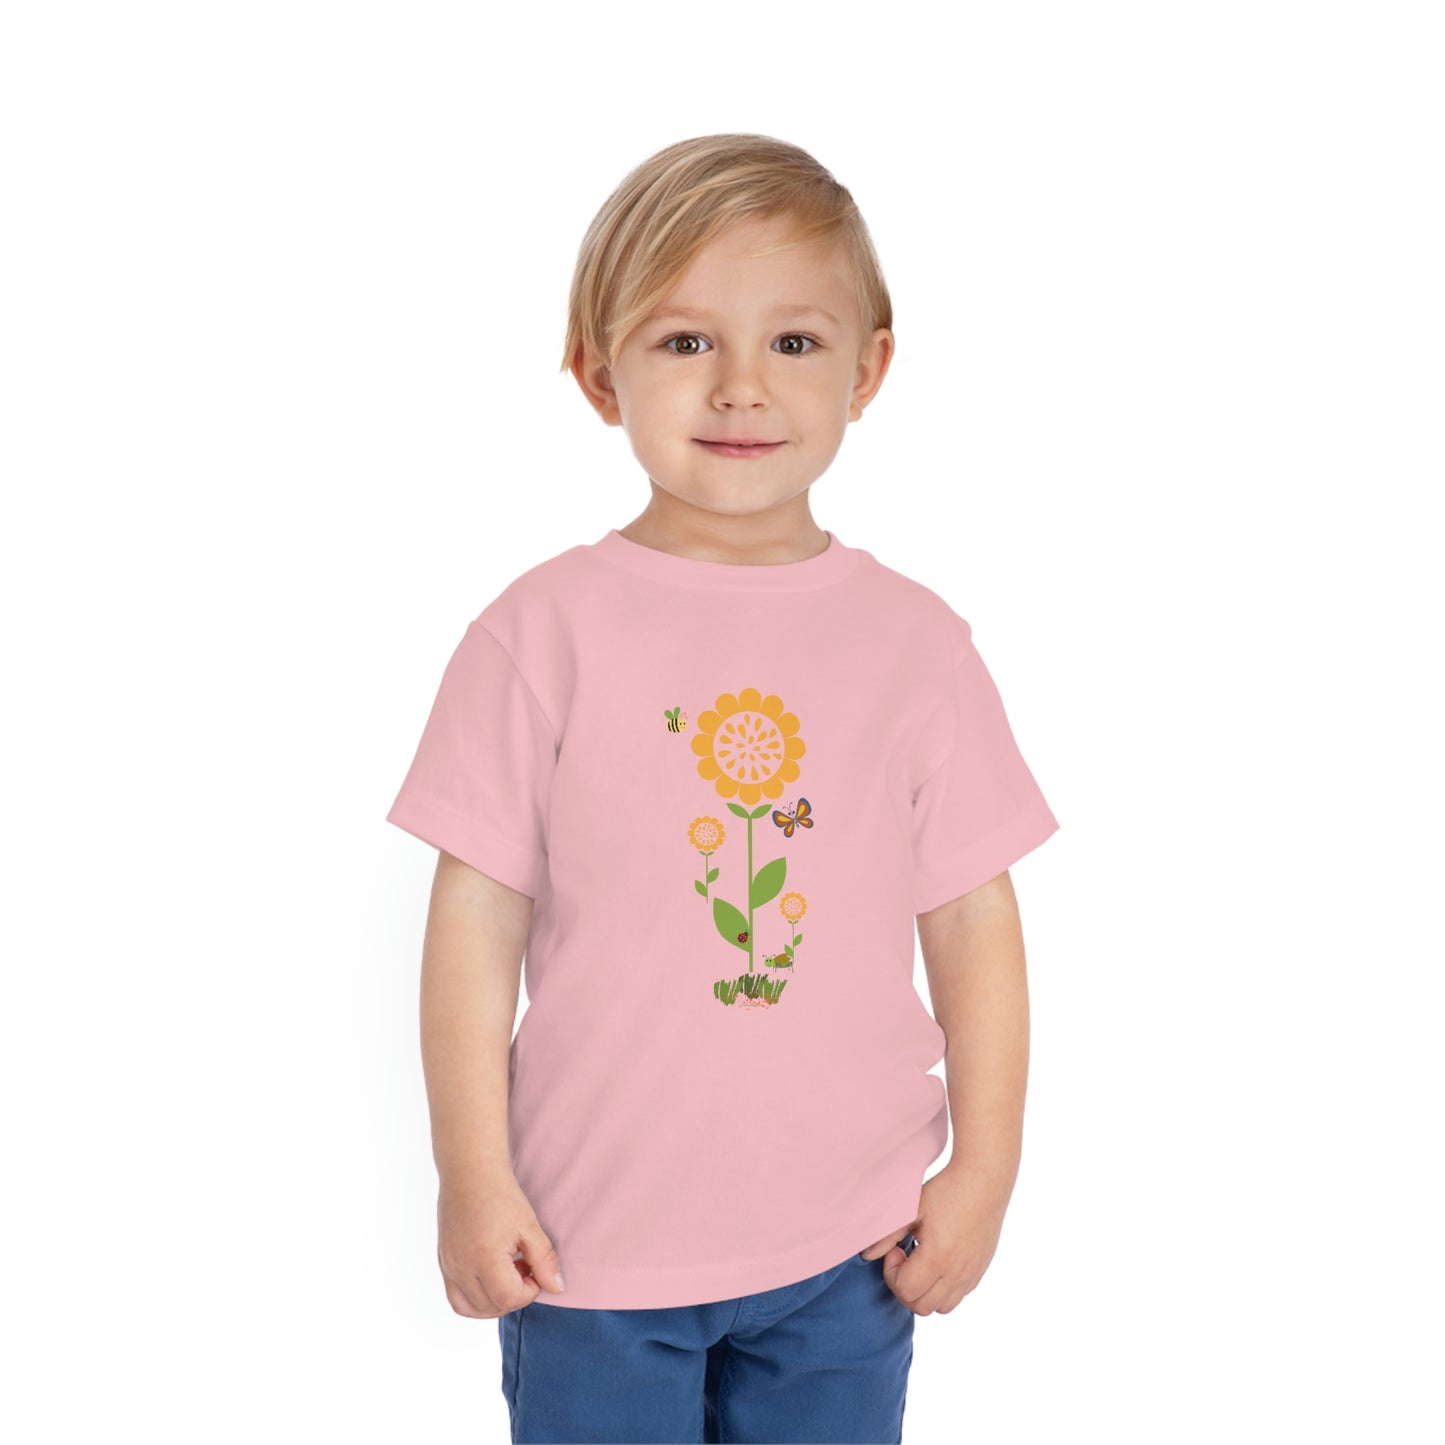 Mock up of child wearing our Pink T-shirt